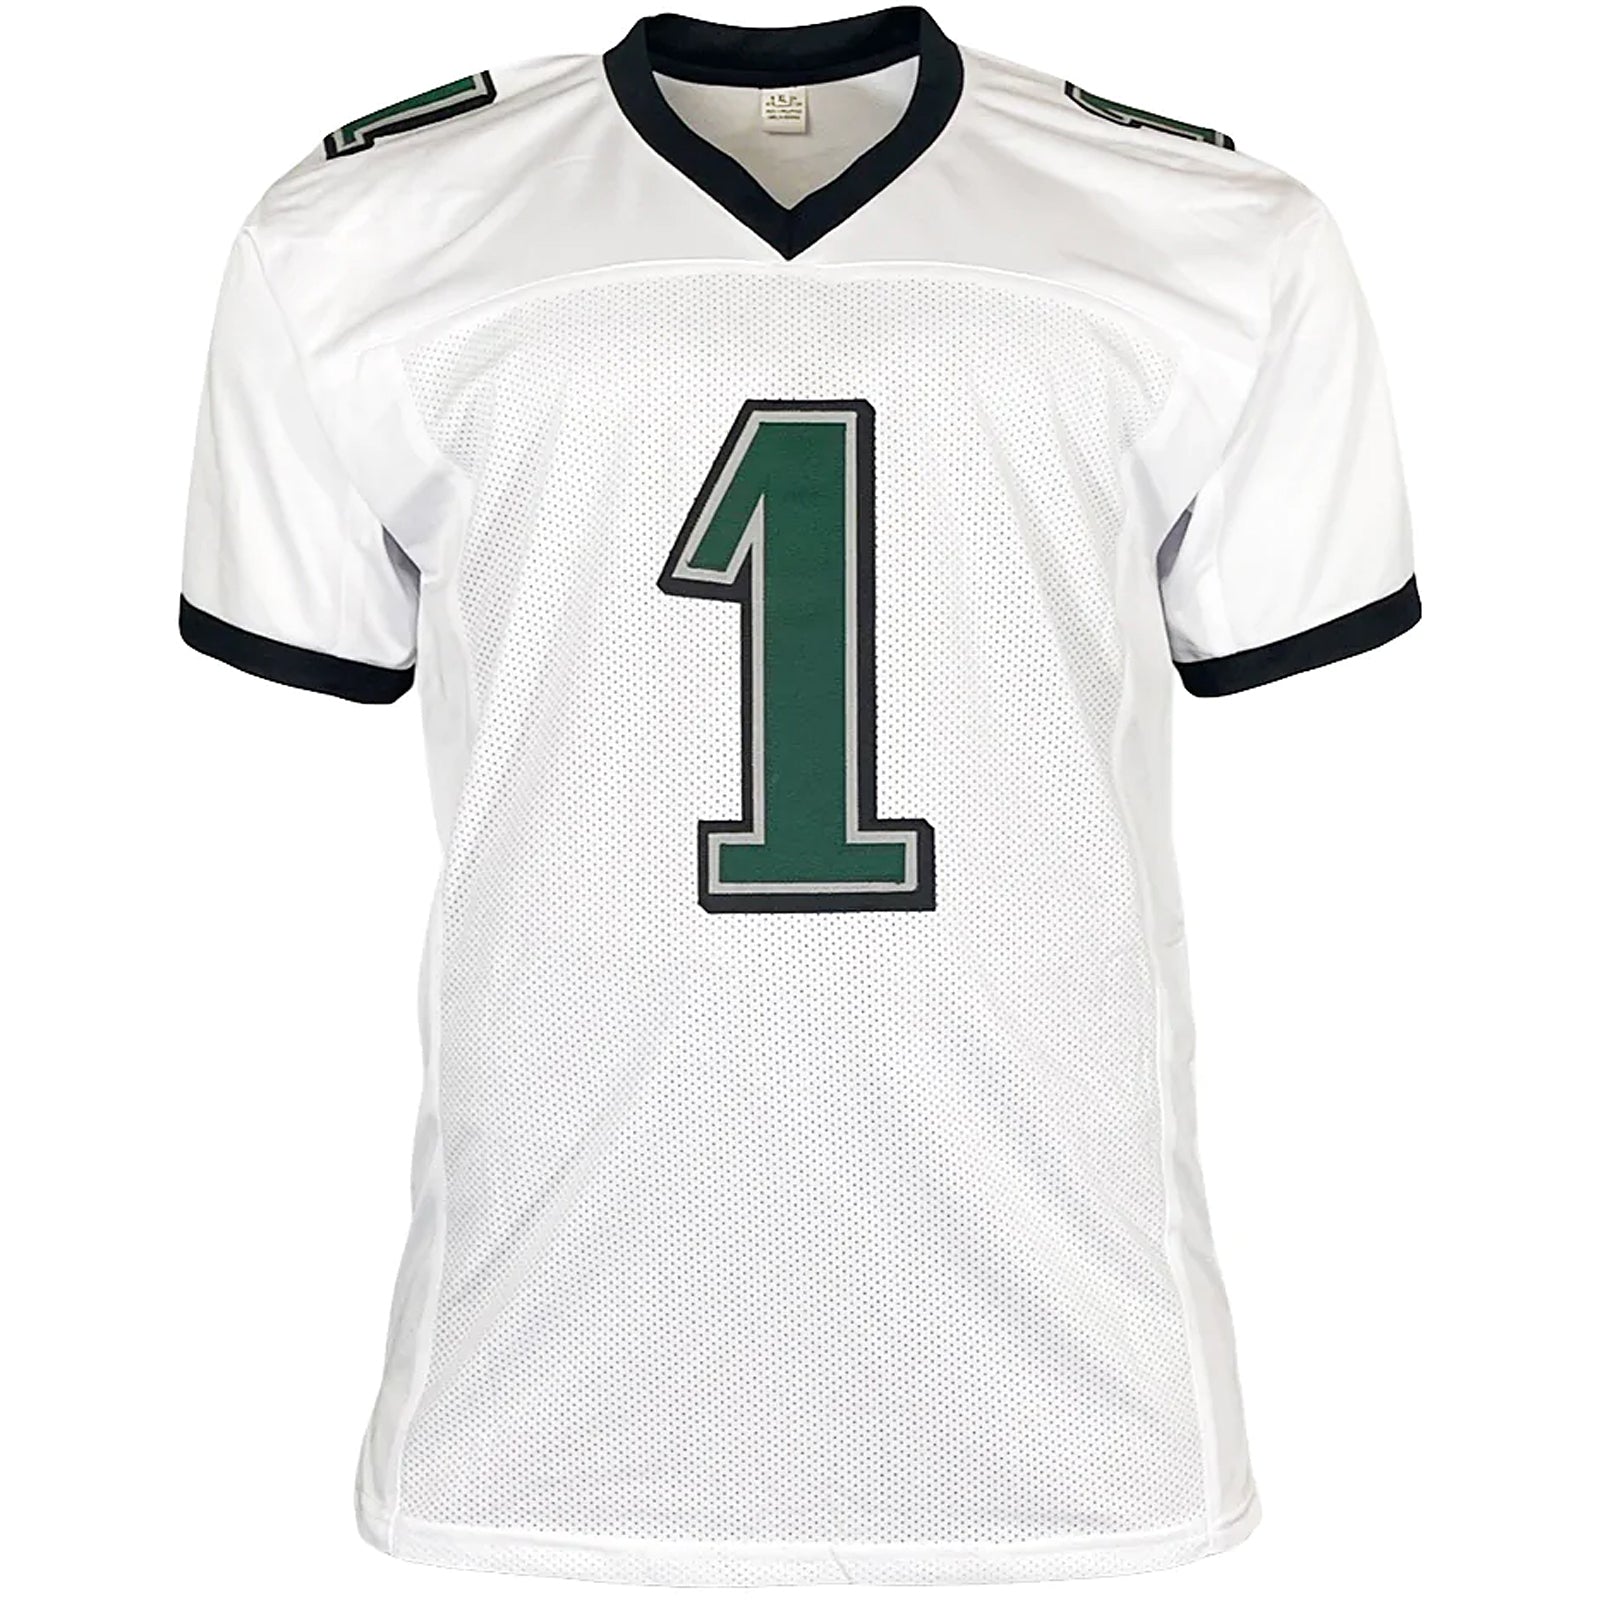 White Jalen Hurts Jersey for Women, 1 Eagles Jersey Stitched